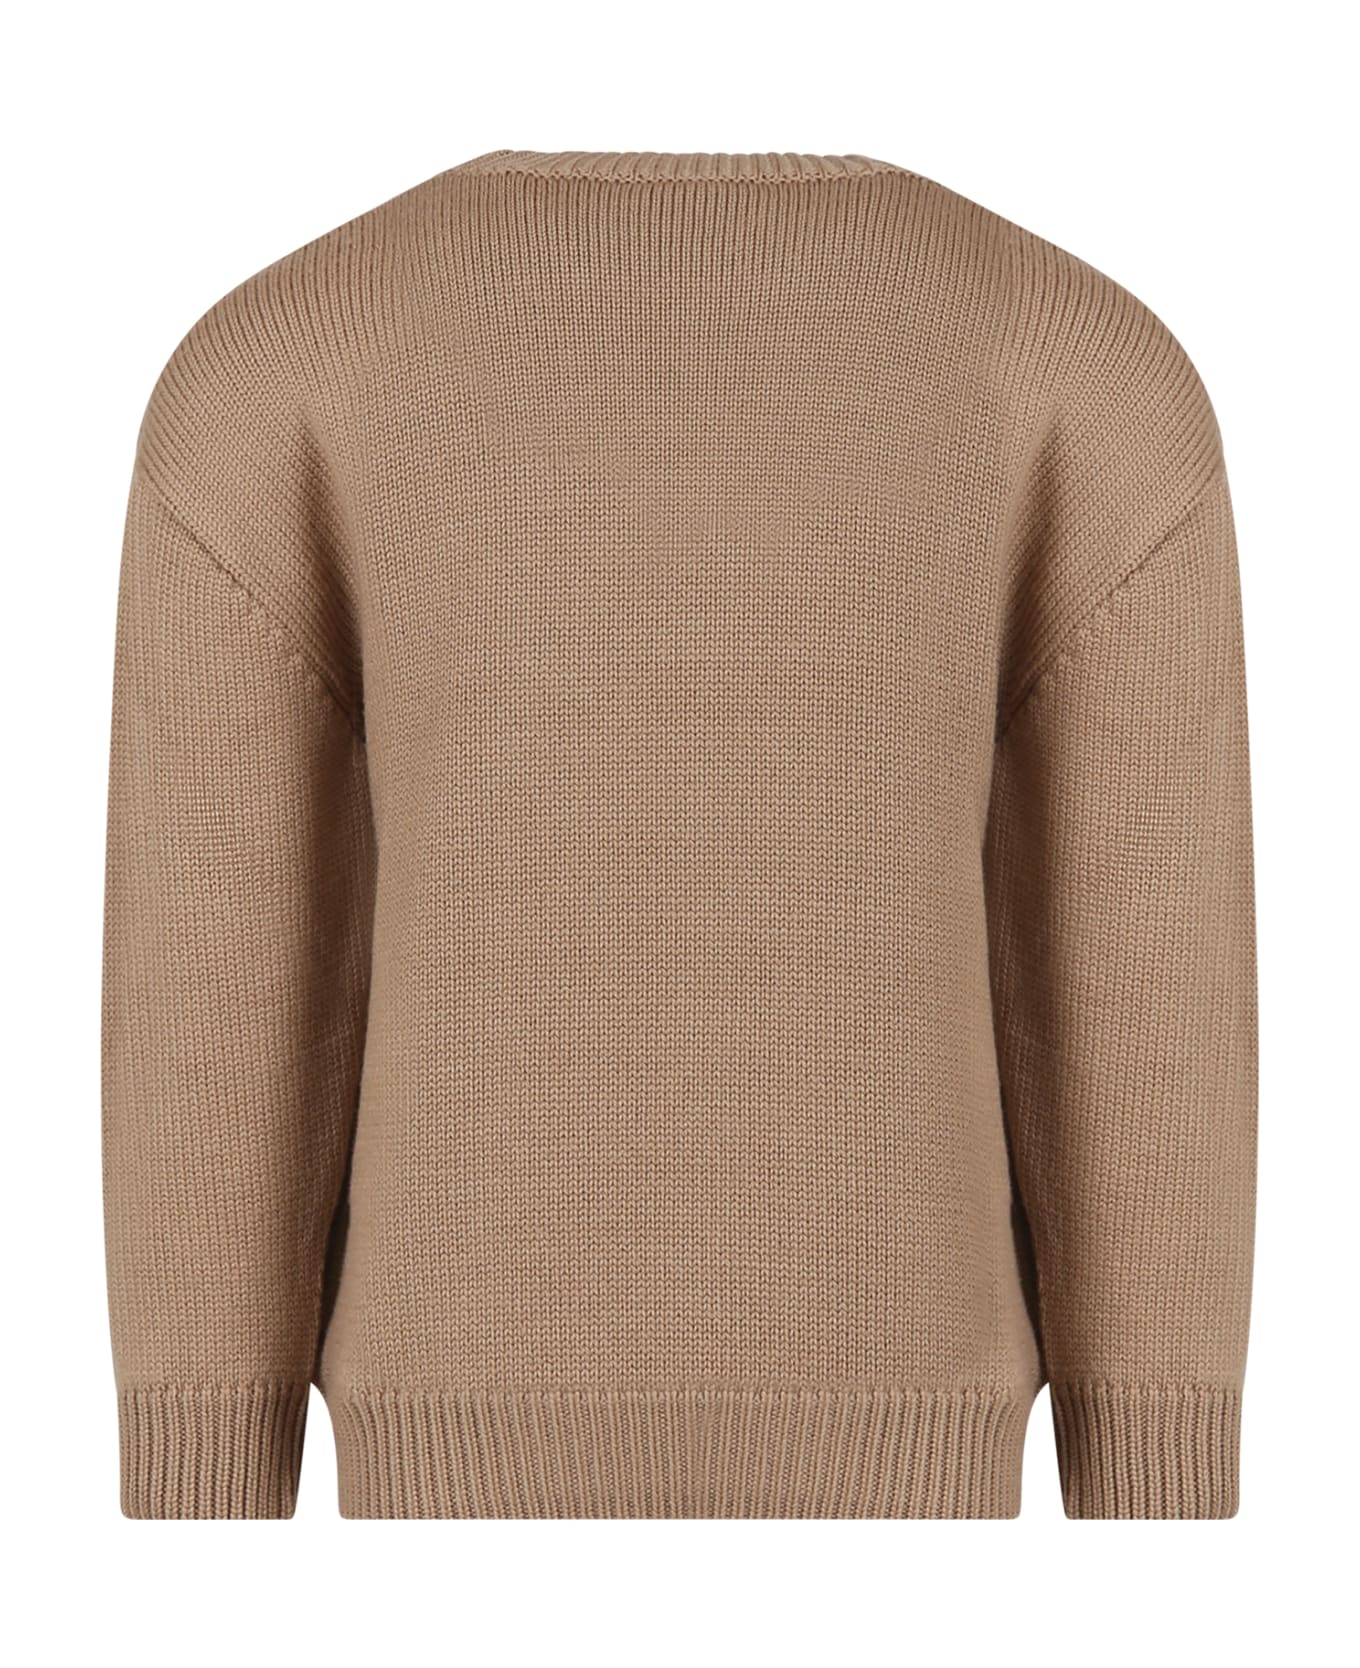 Fendi Camel Sweater With Logo For Kids - Brown